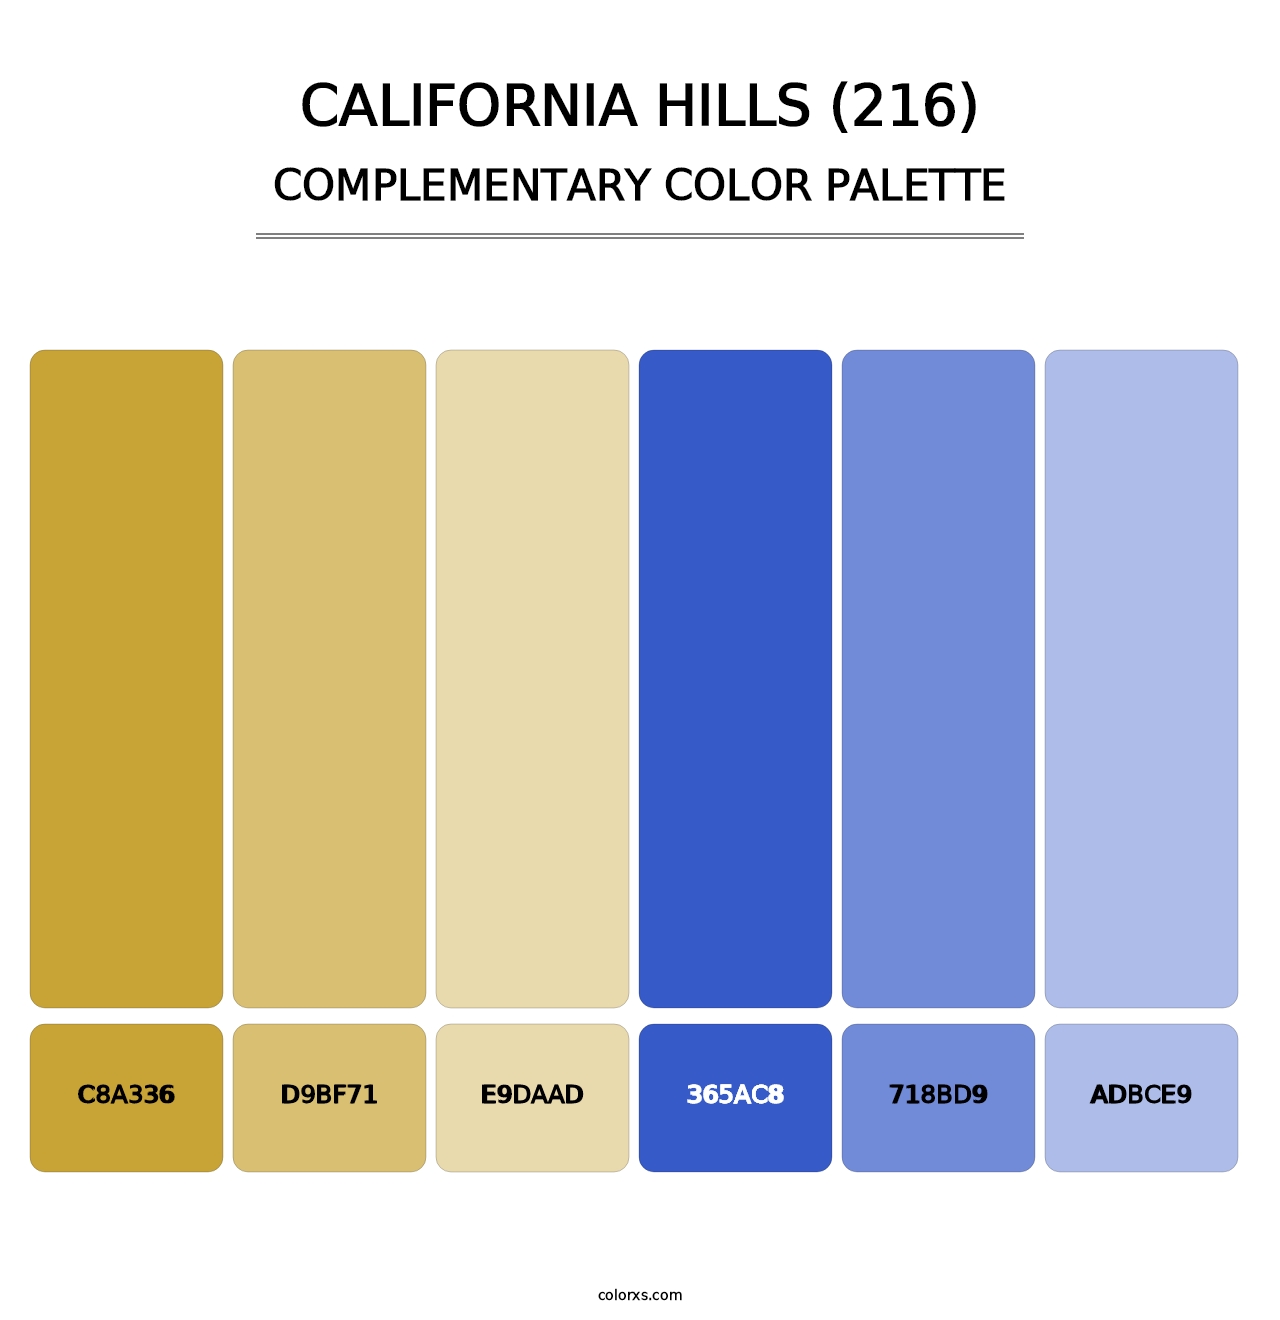 California Hills (216) - Complementary Color Palette